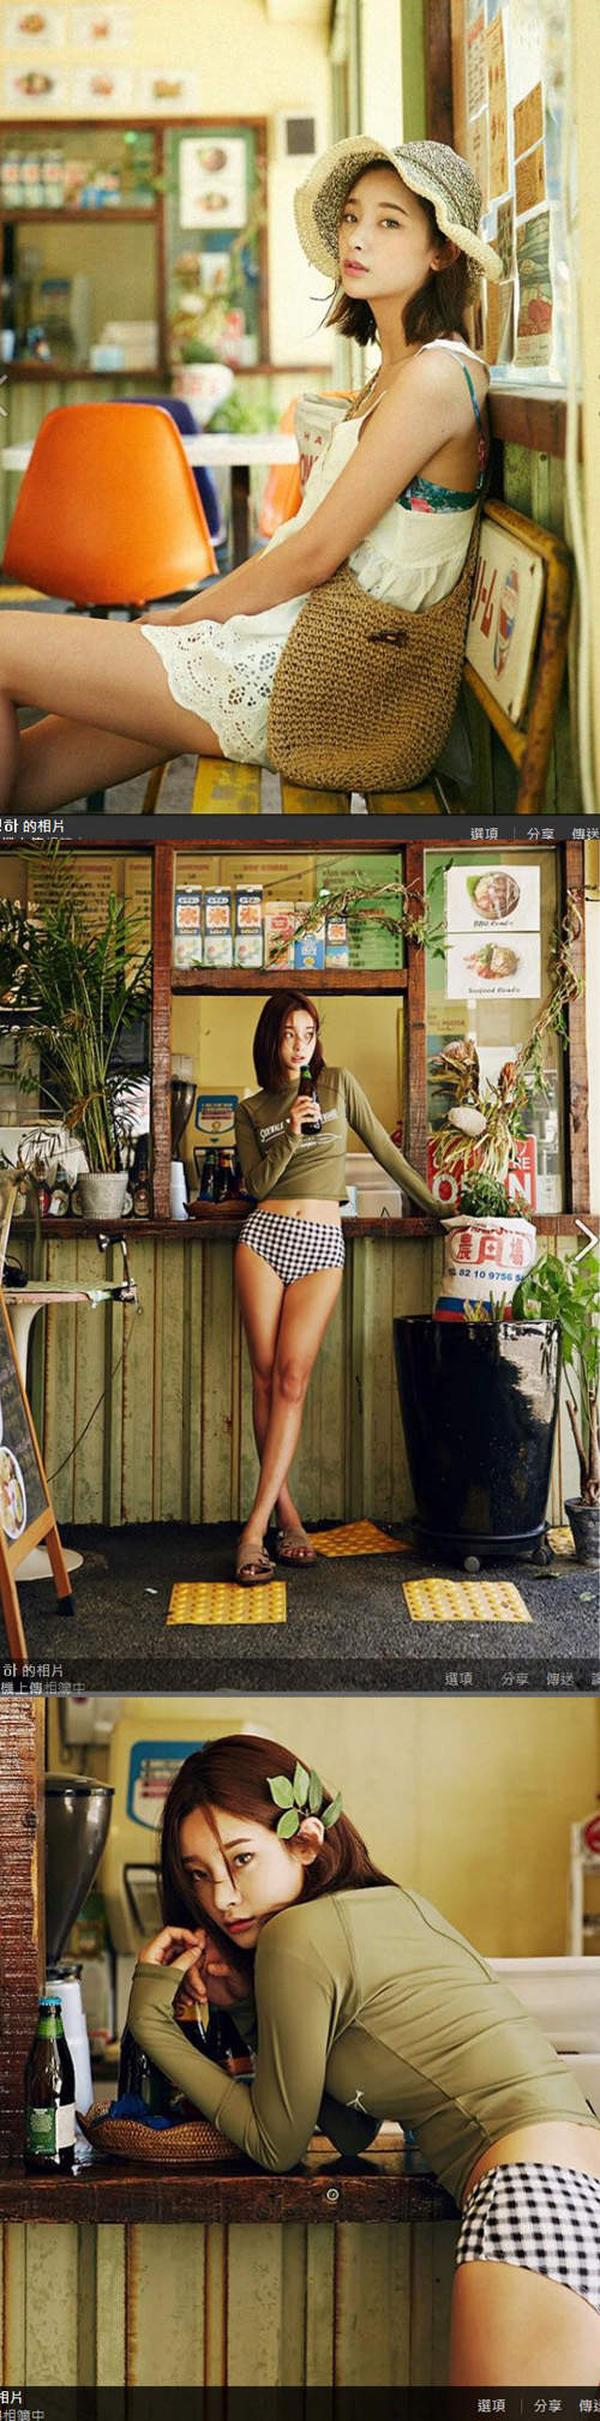 1993Kg Beautiful Legs Sexy Picture and Photo